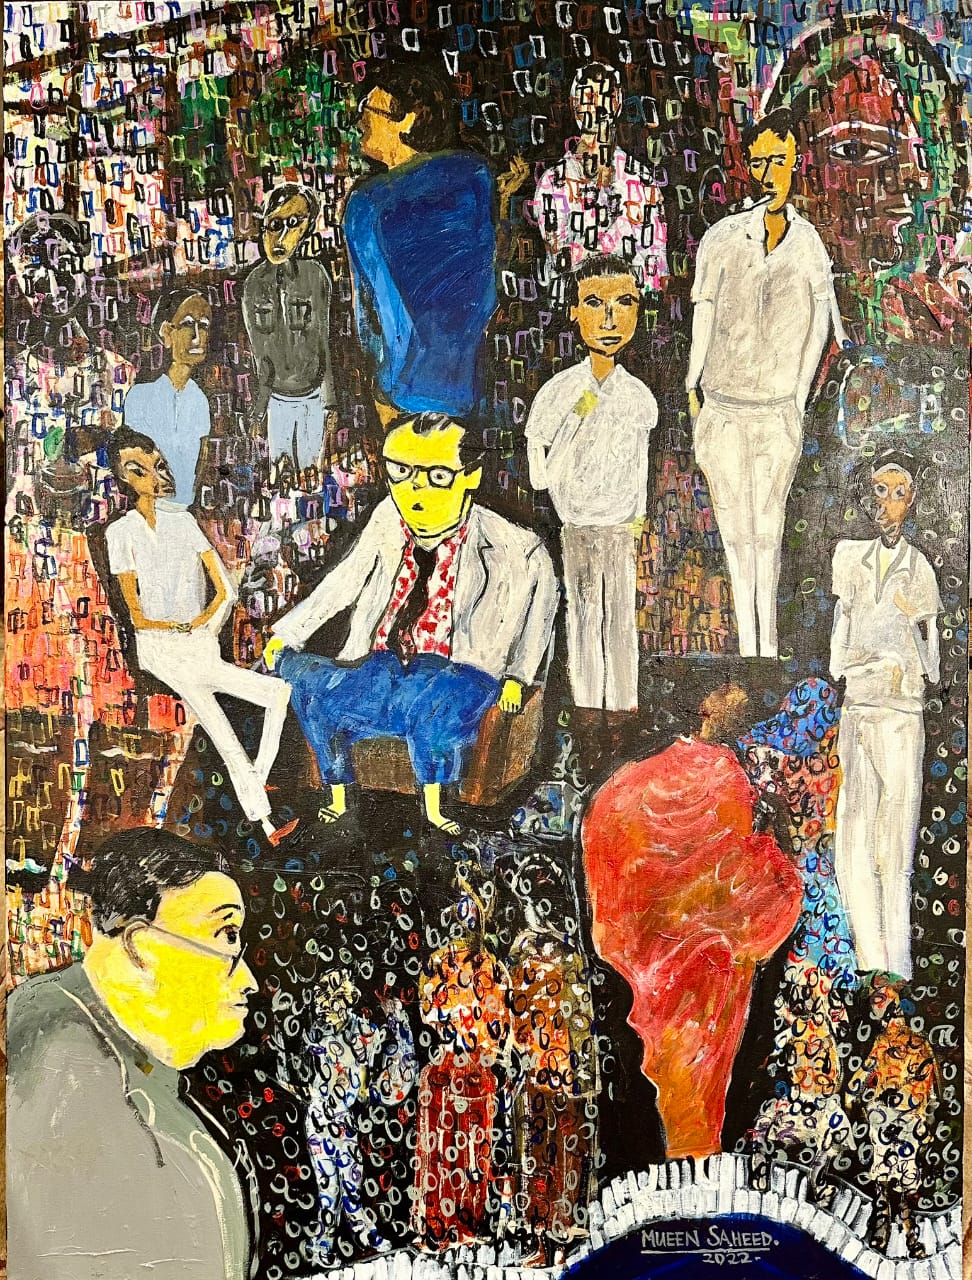 Two Paintings of the '43 Group Artist Mueen Saheed's pay tribute to the iconic caricature portrayal of a movement that defined an era